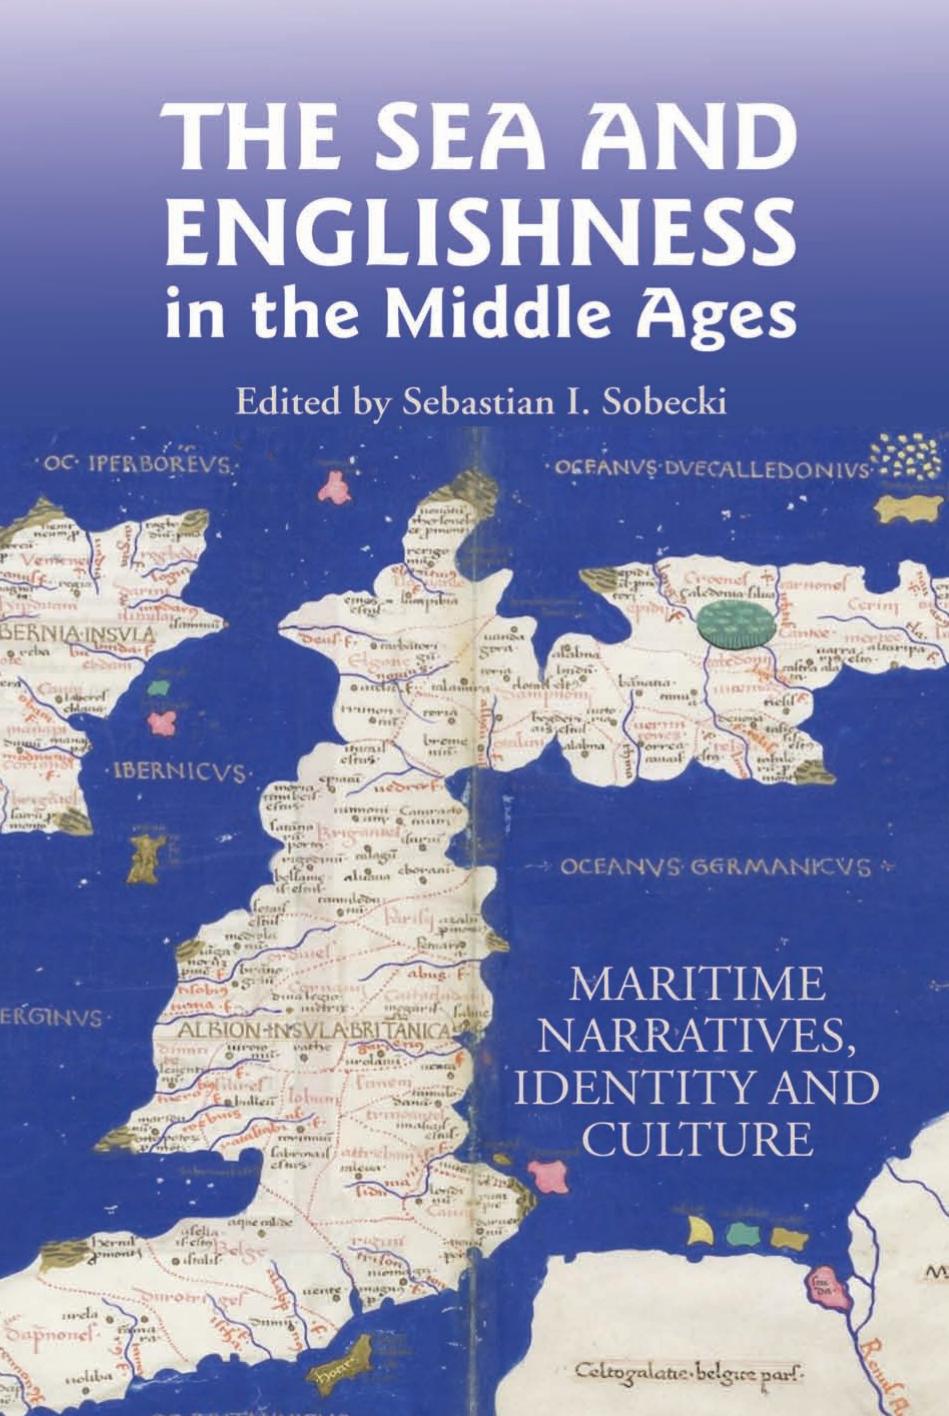 The Sea and Englishness in the Middle Ages by Sobecki Sebastian I